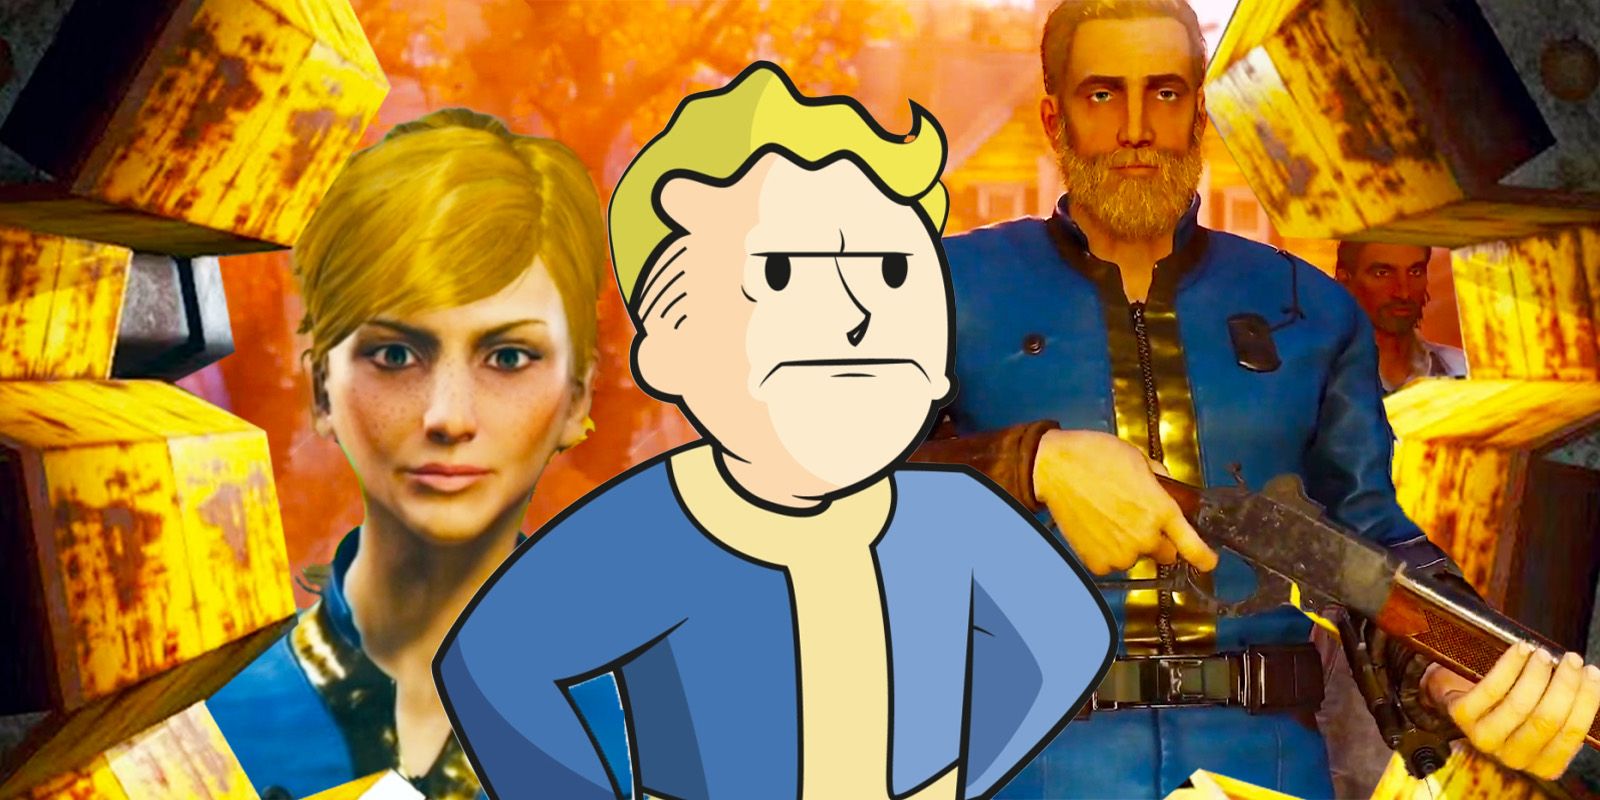 A few Vault Dwellers from Fallout 76, with Vault Boy looking mad.